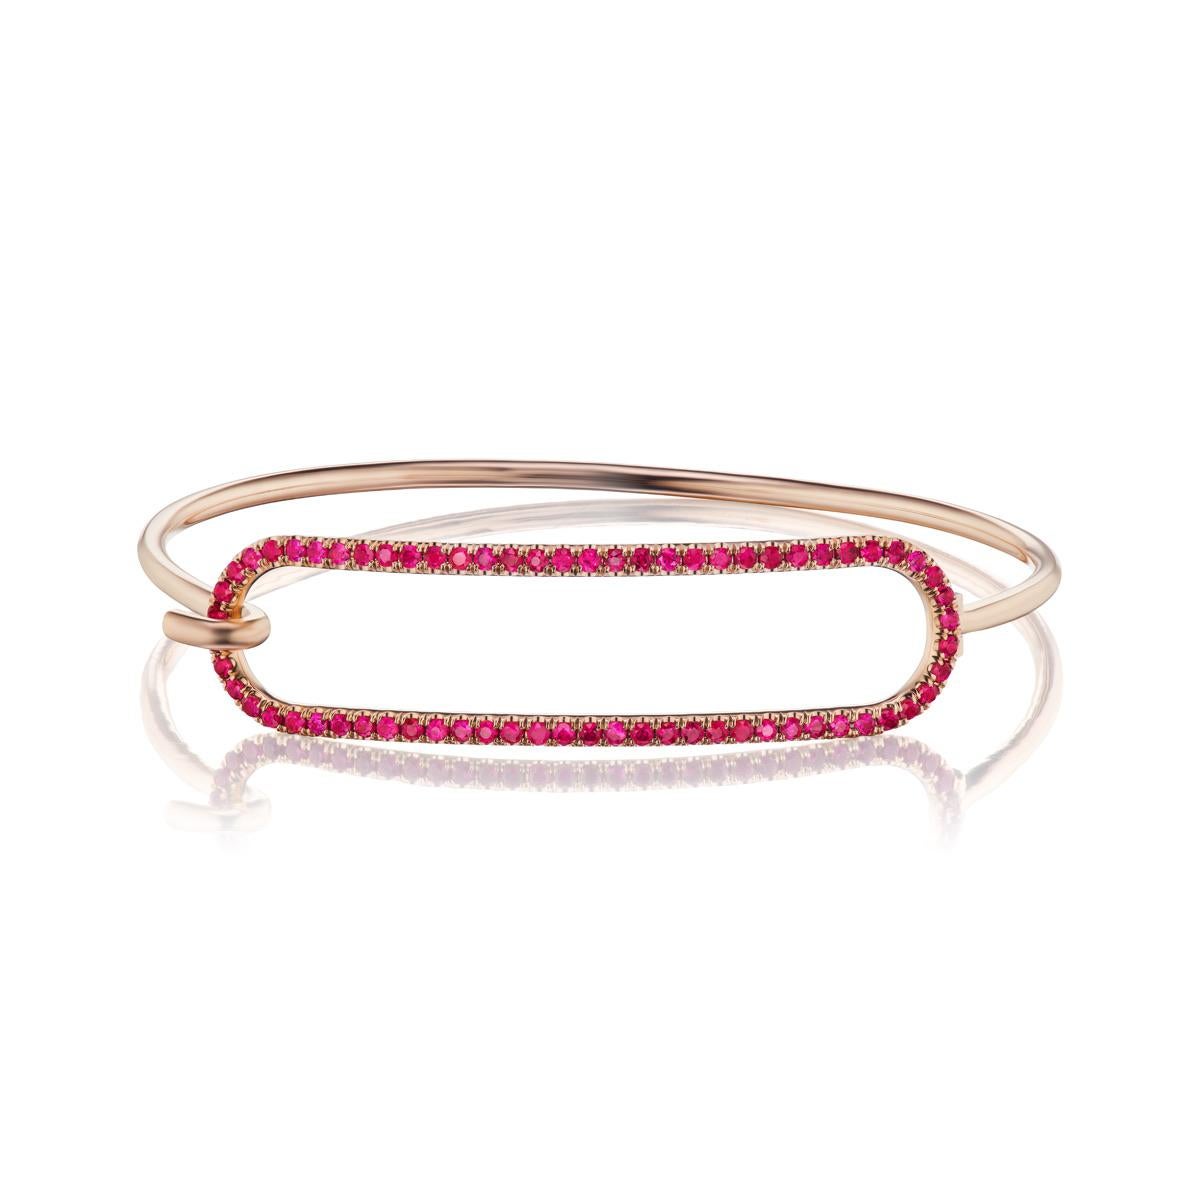 Andrew Glassford's signature 2mm Ruby Tension Bracelet in 18K rose gold with 1.2 carats of round rubies that creates a vibrant pop of color on the wrist. The entire bracelet is made of a 2mm round 18k rose gold wire. The tension series is based off